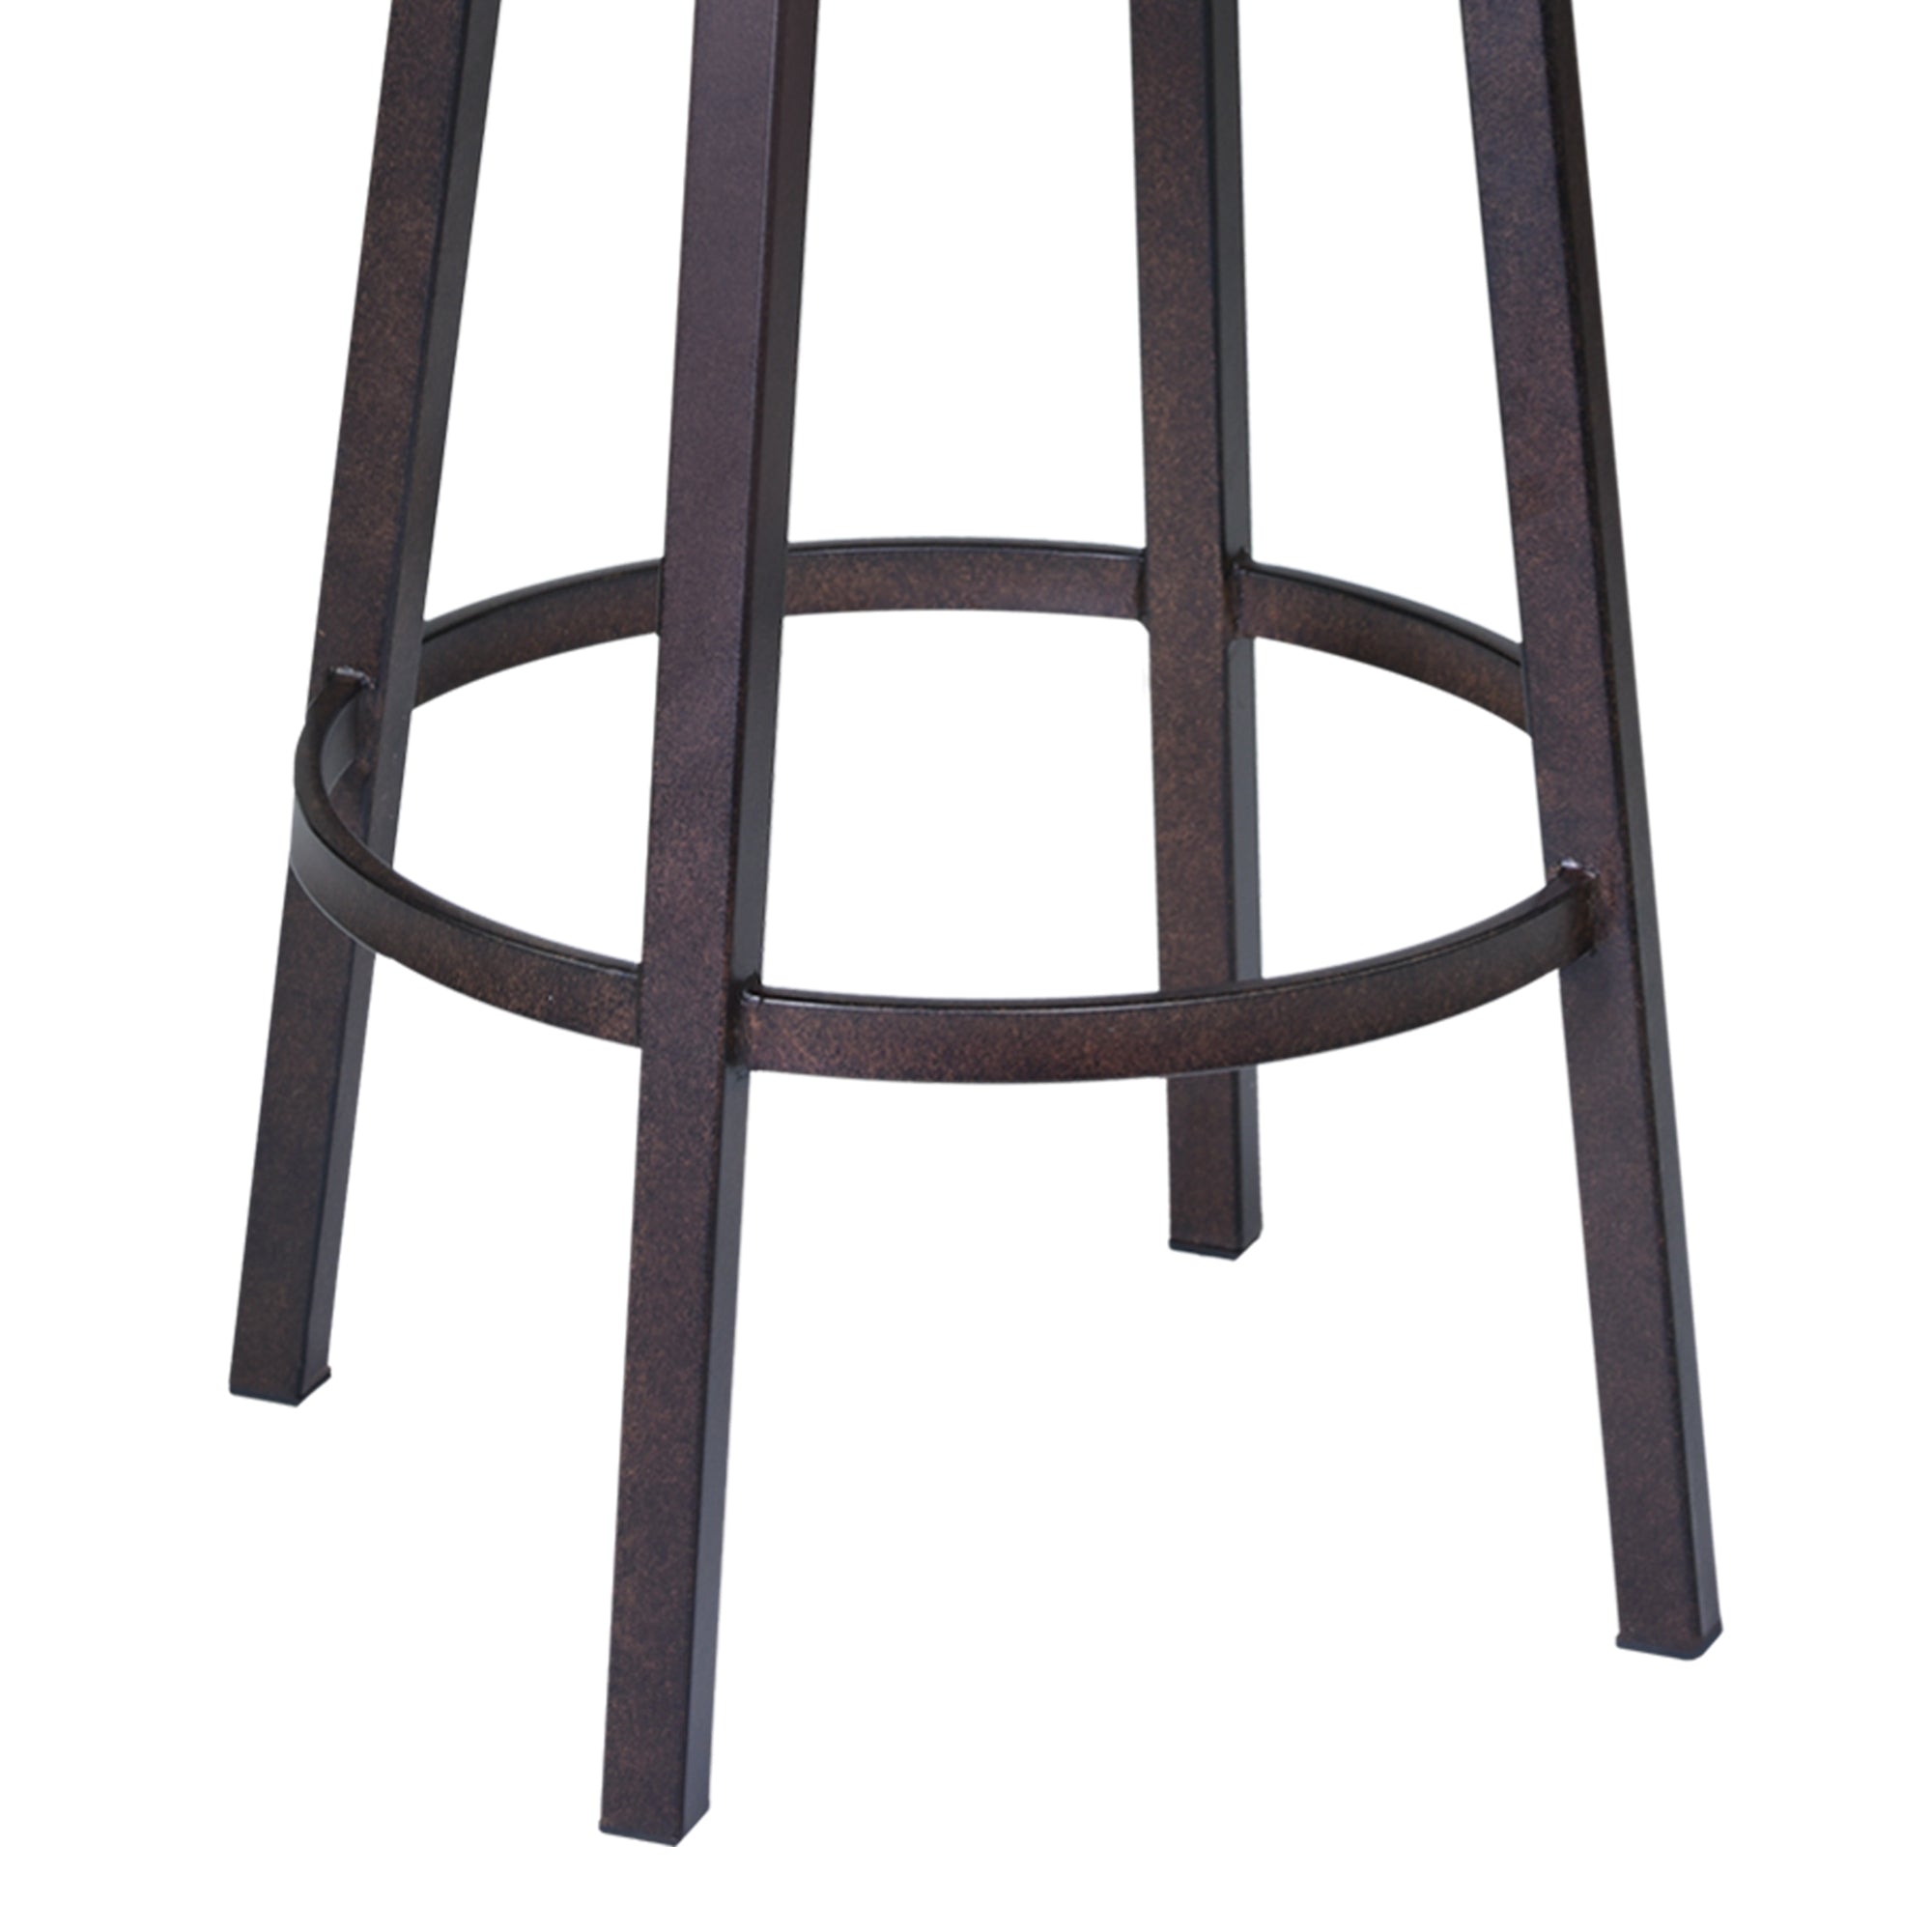 Fargo Counter Stool or Barstool in Auburn Bay finish with Brown Pu upholstery